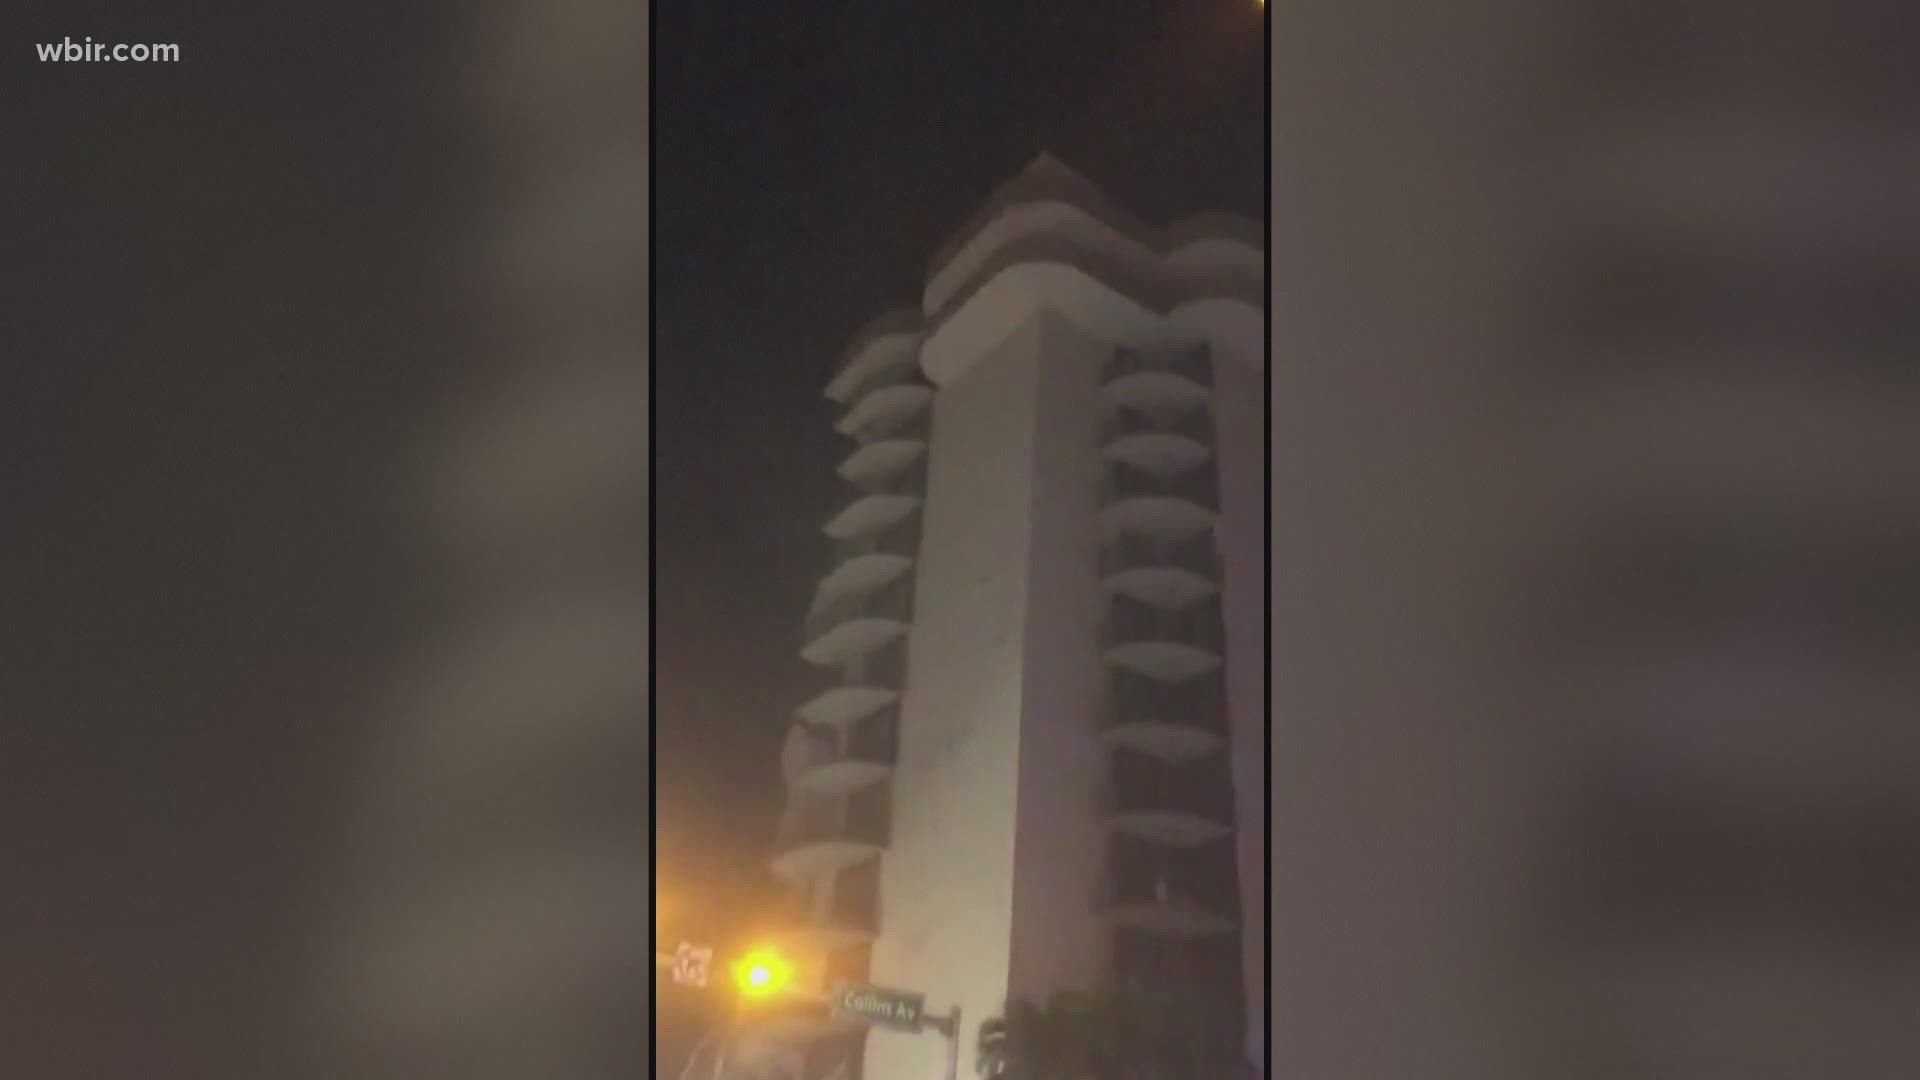 A high-rise building partially collapsed early Thursday morning in Surfside, Miami, according to police.